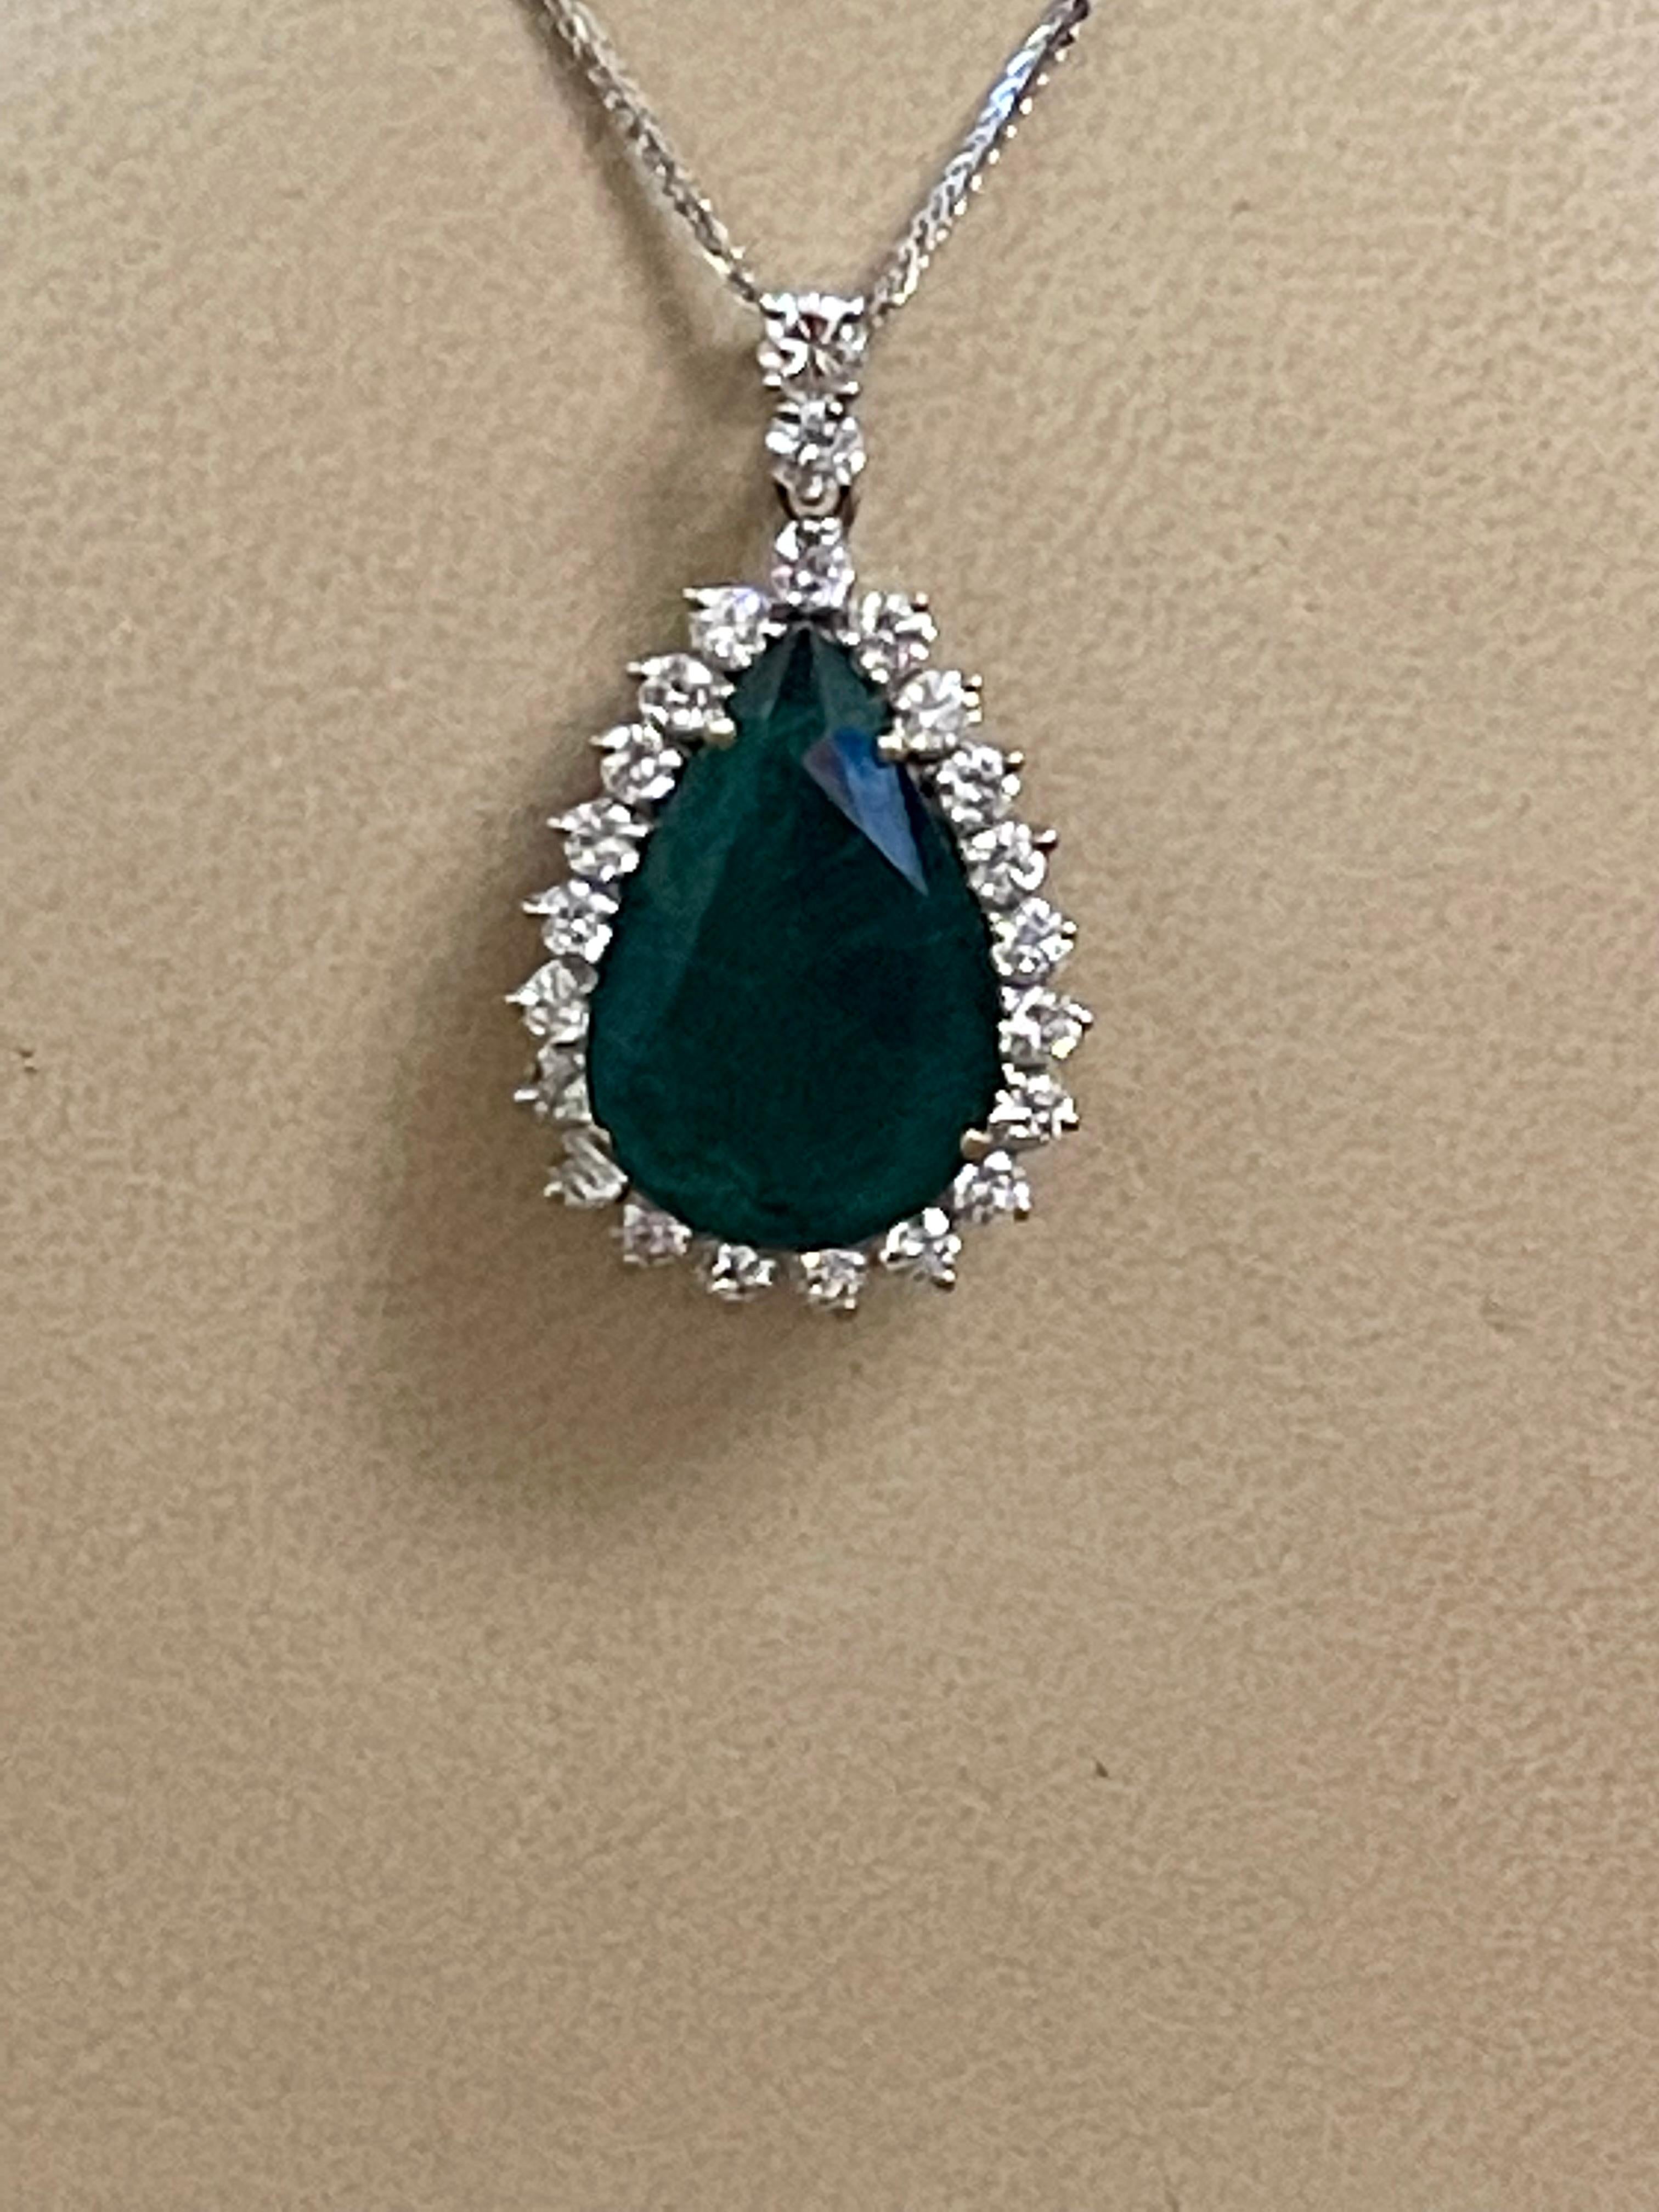 15 Ct Pear Hydro Emerald & 4 Ct Diamond Pendent/Necklace 18 Kt White Gold For Sale 6